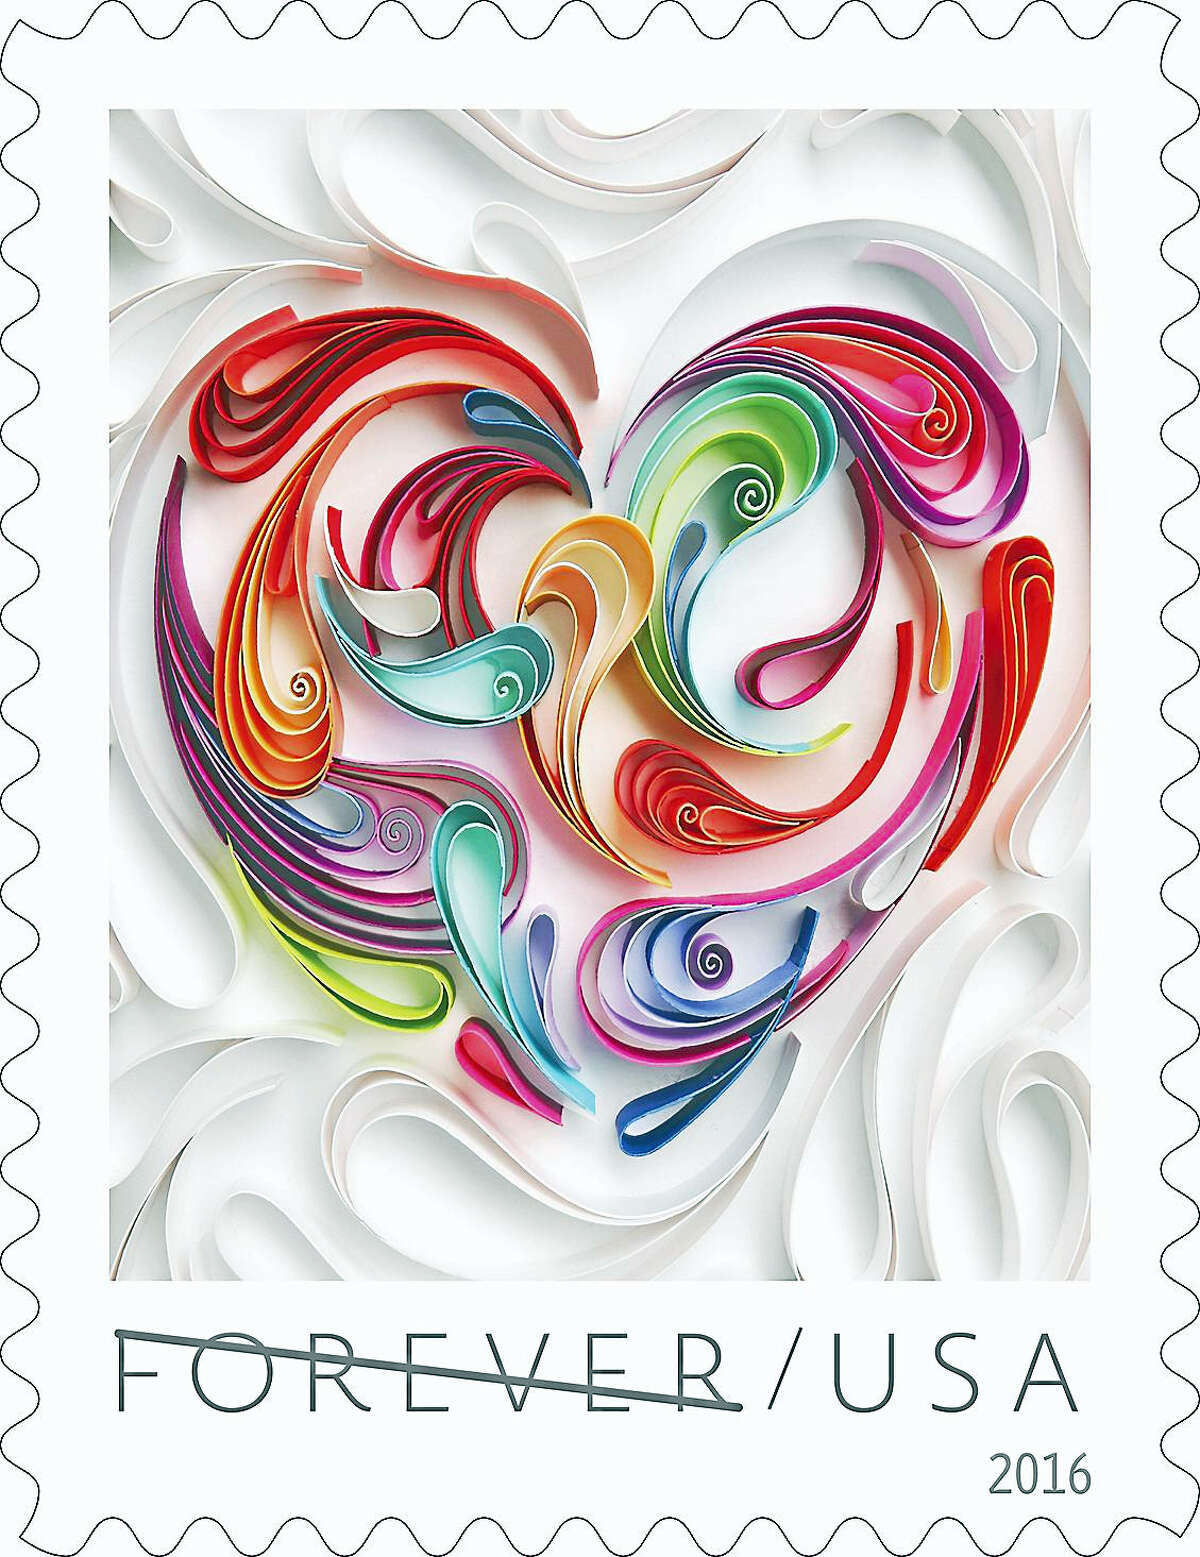 The 2016 Love stamp — a Quilled Paper Heart Forever stamp. (The line through “Forever” is no reflection on the love theme, said a postal spokesman; it’s to prevent counterfeiting in this display only).